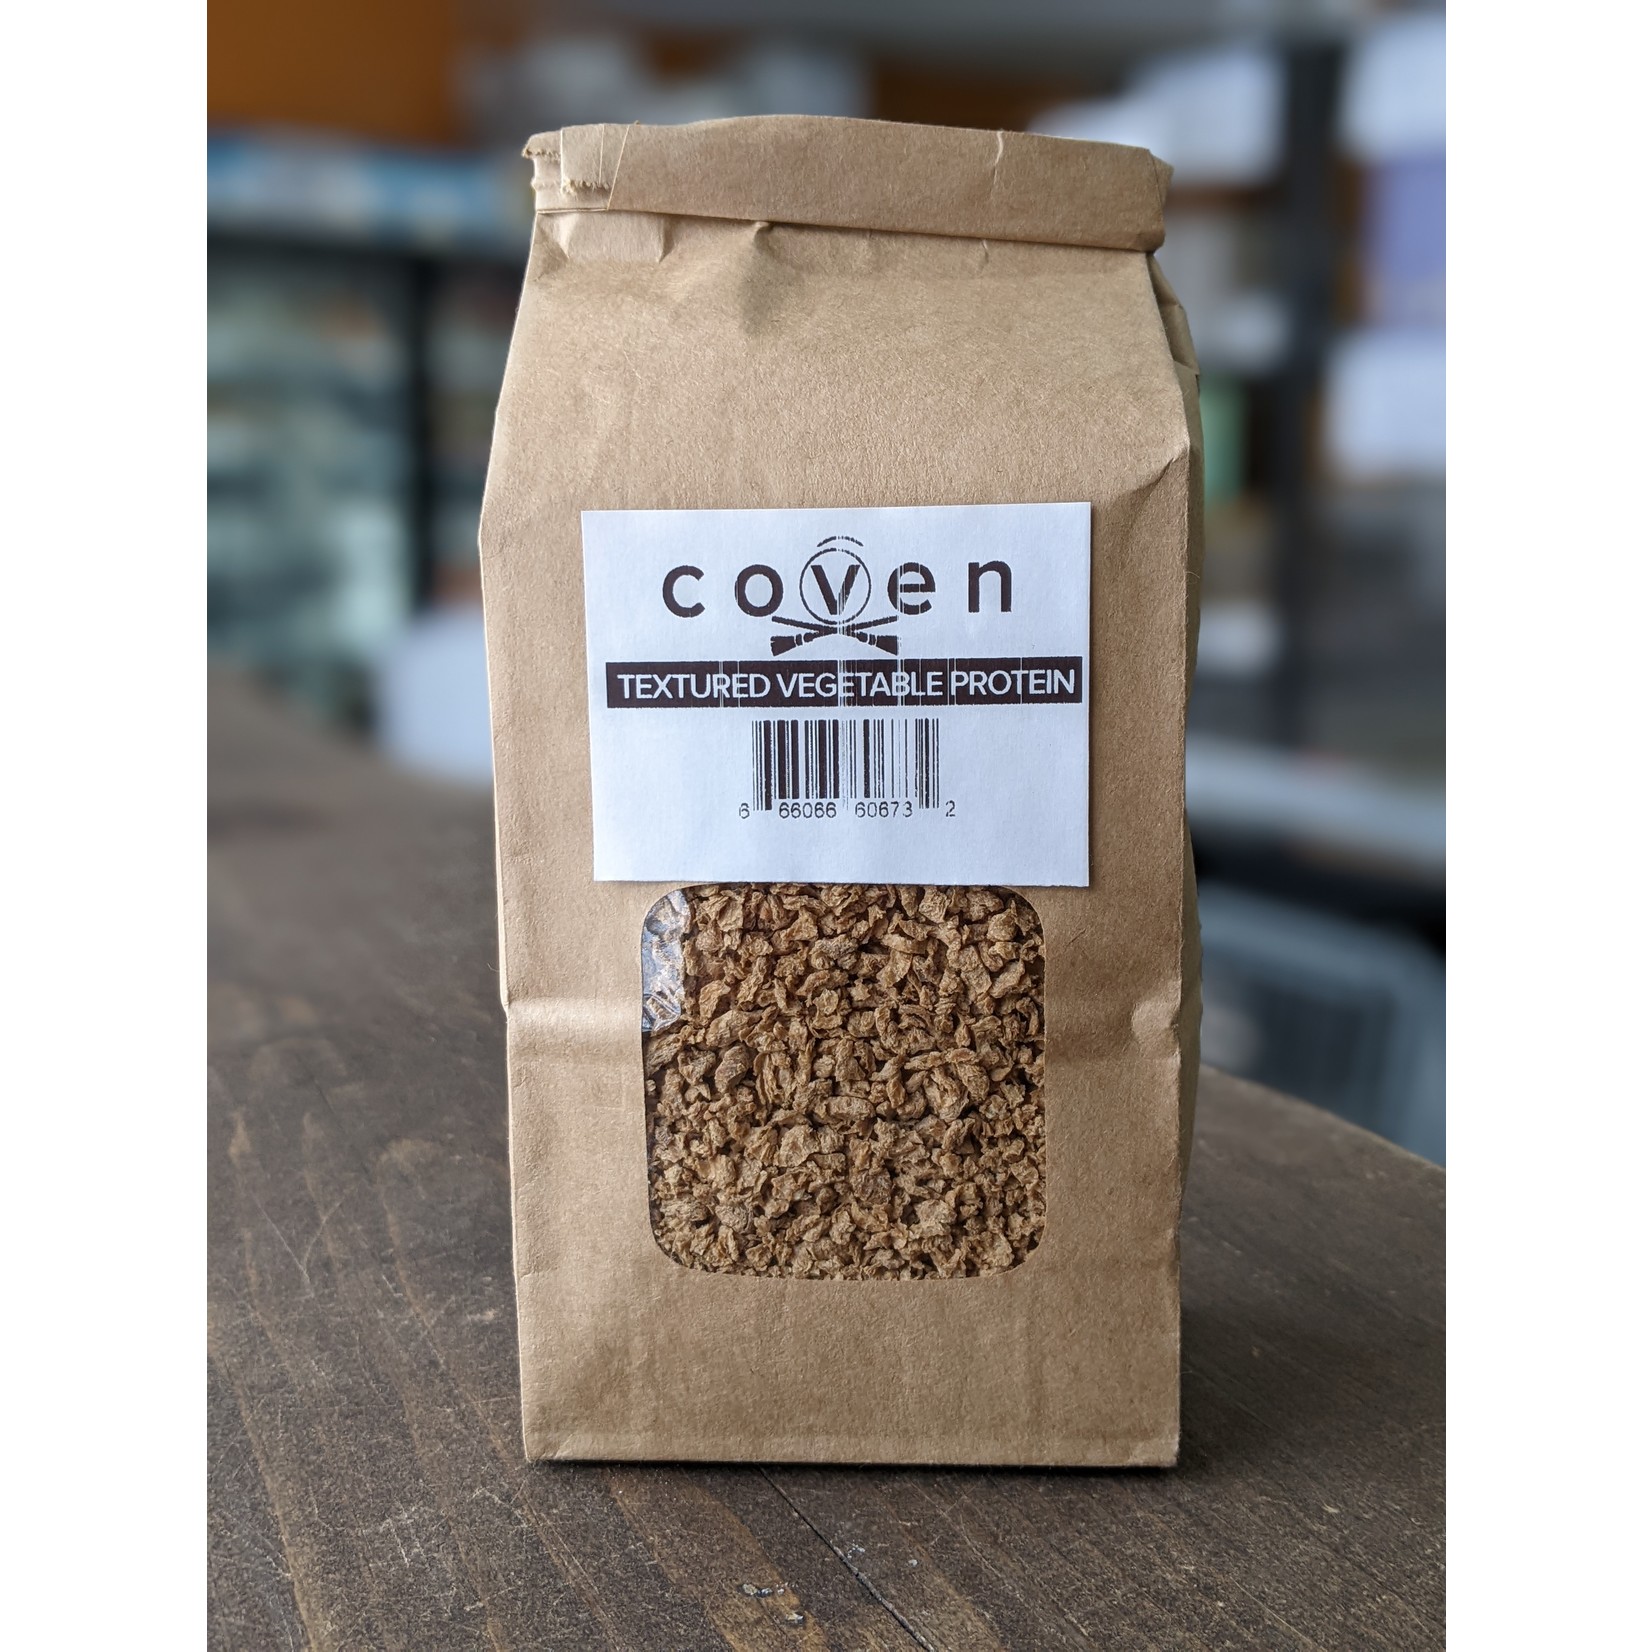 COVEN COVEN TEXTURED VEGETABLE PROTEIN - 250G PACKAGE